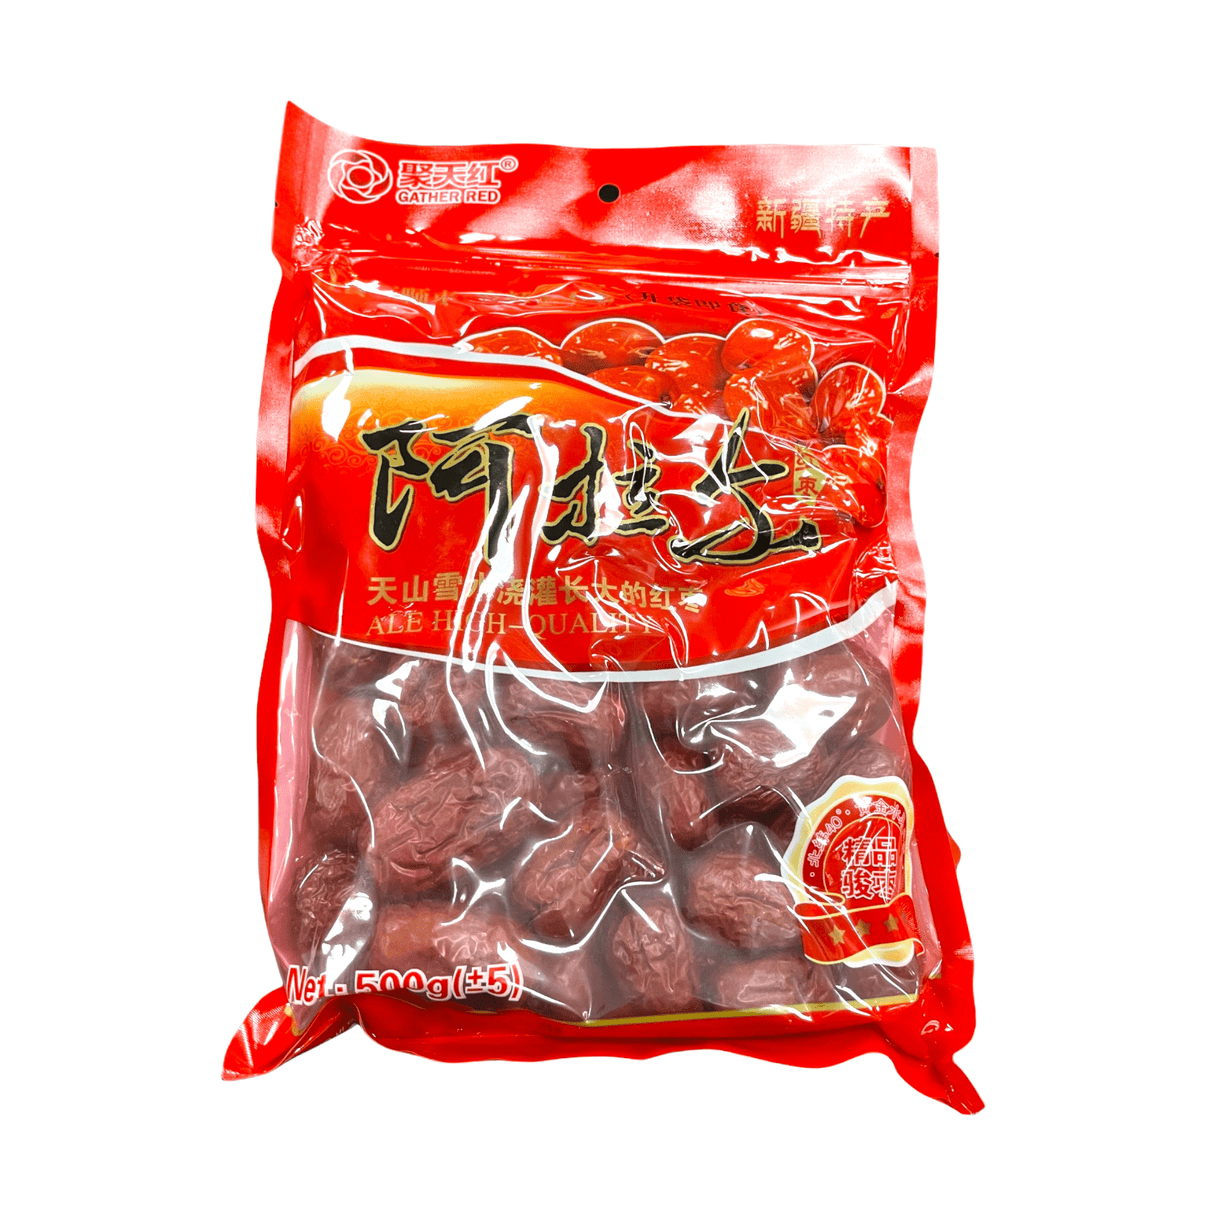 Gather Red Jujube Special Grade A